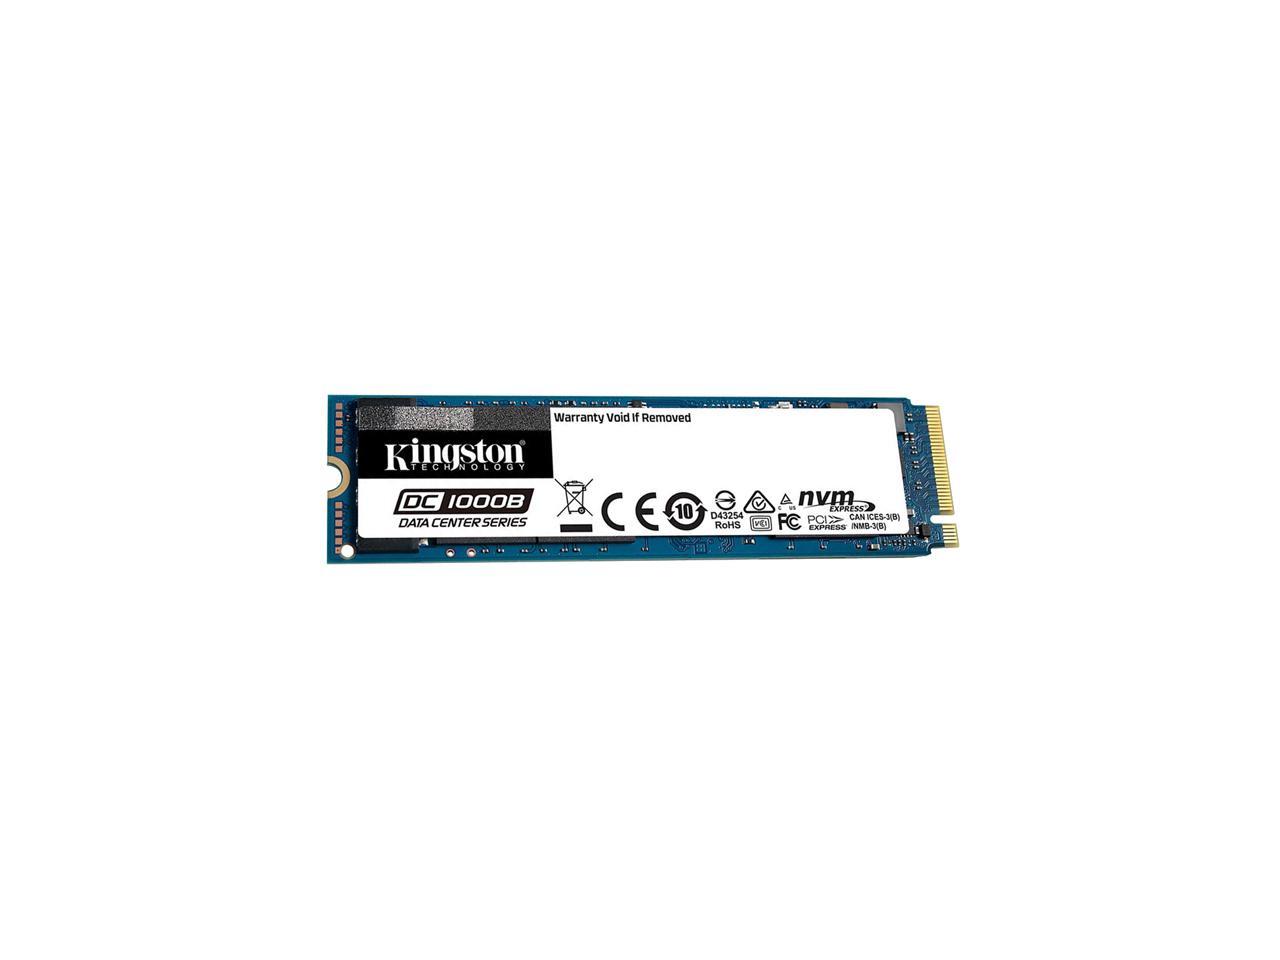 Kingston DC1000B SEDC1000BM8/960G M.2 2280 960GB PCIe NVMe Gen3 x4 3D TLC Enterprise Solid State Drive.